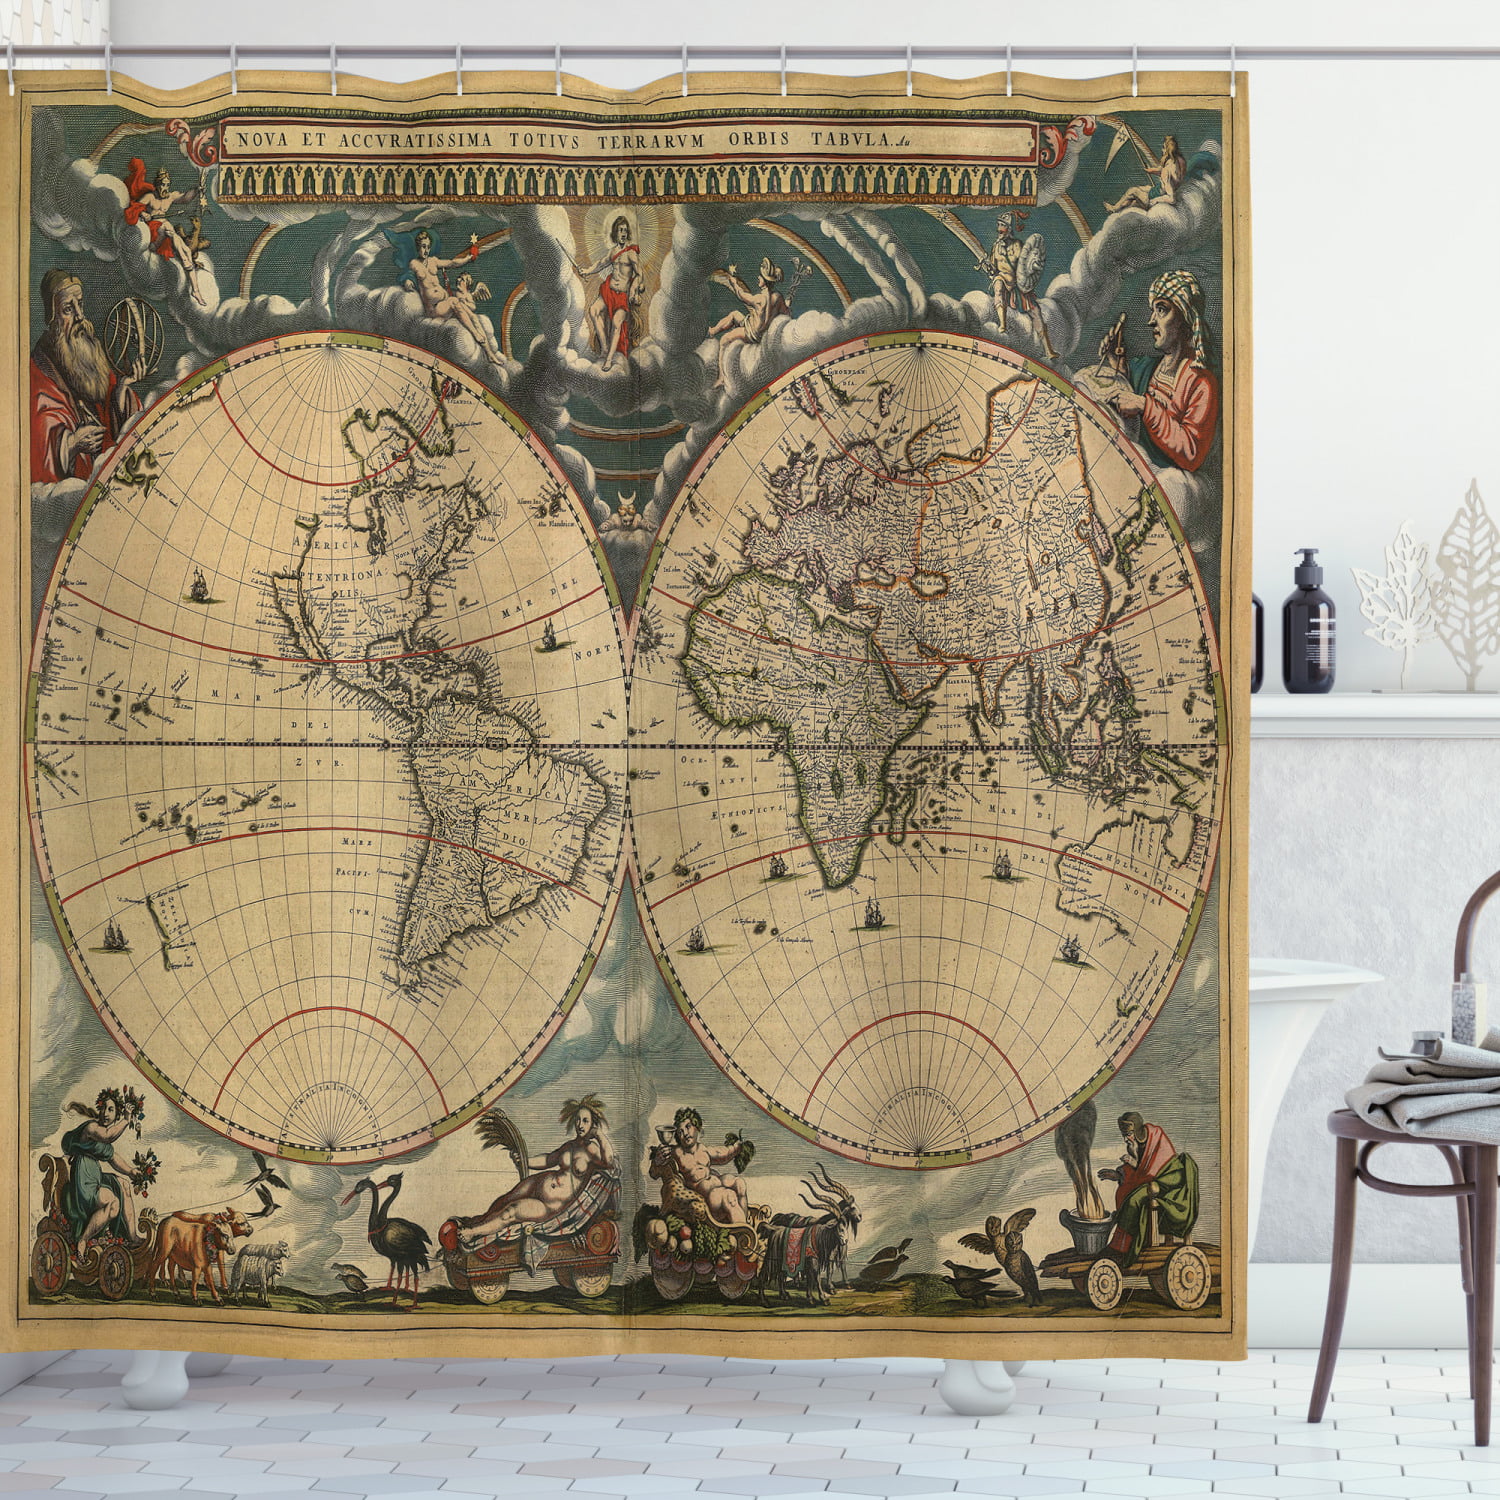 World Map Fabric SHOWER CURTAIN 70x70 Vintage Look Style Countries Globe